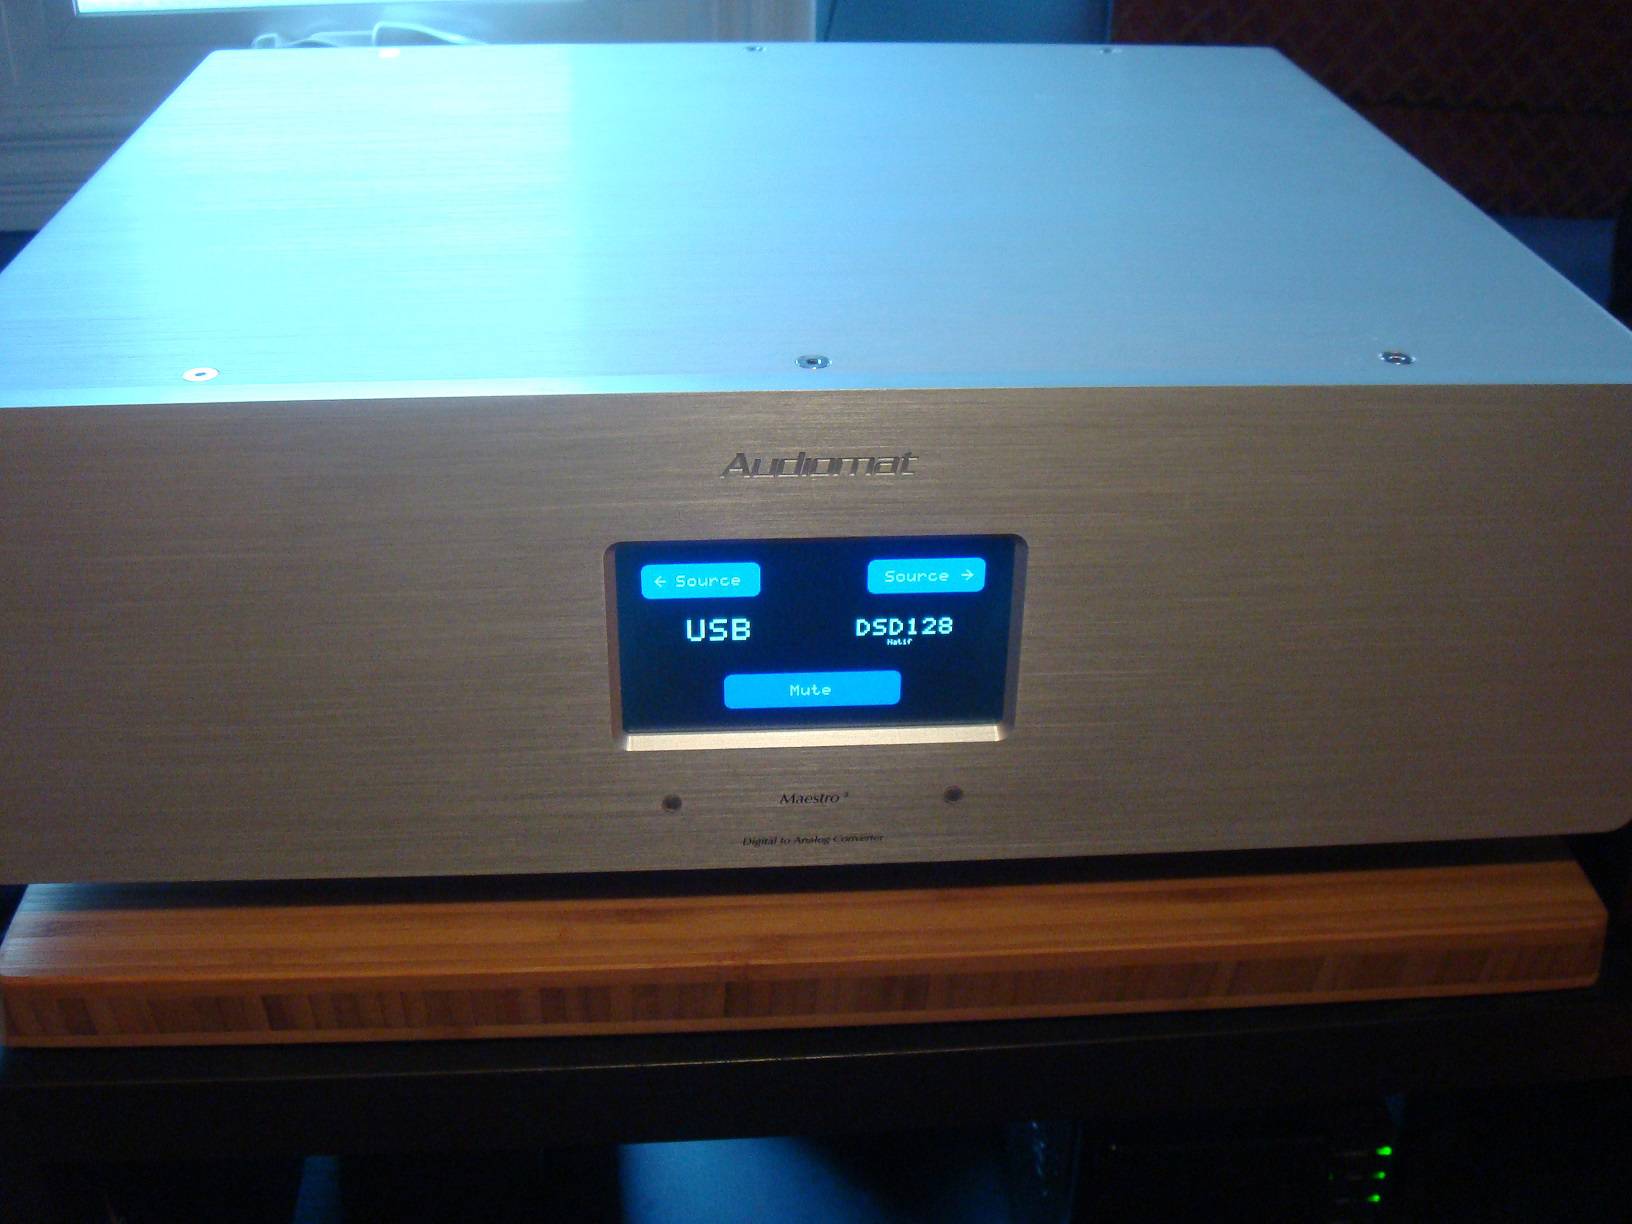 Audiomat Maestro 3 Reference